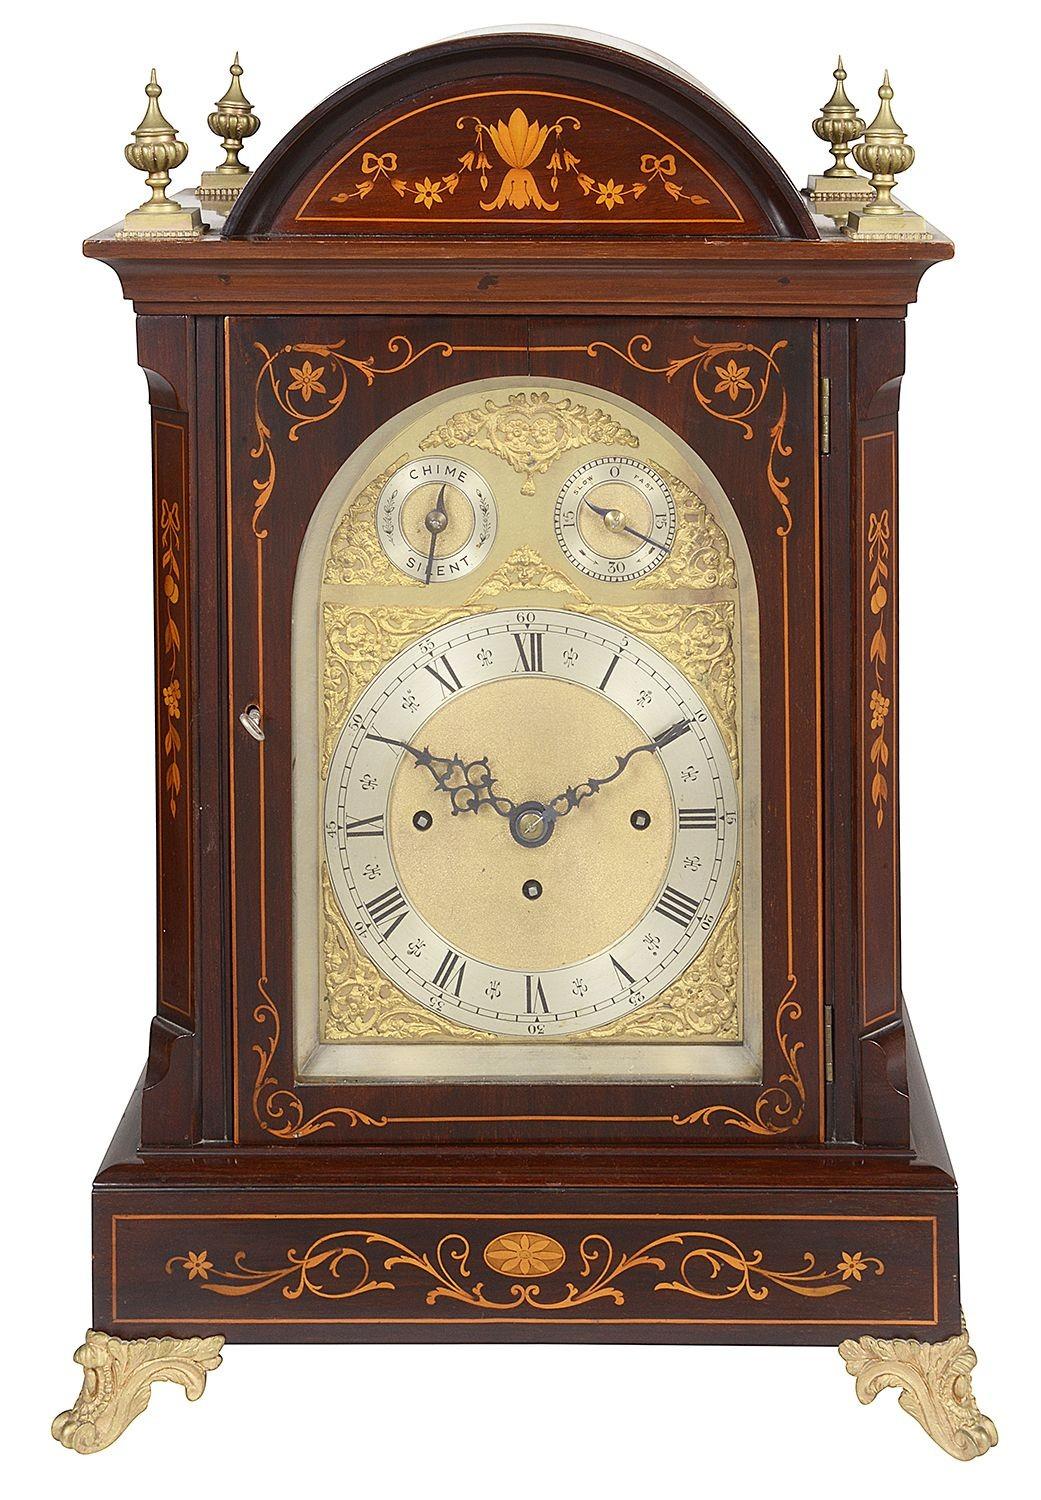 A very good quality Edwardian period Mahogany musical bracket clock, with boxwood inlaid decoration, ormolu finials and feet. The brass arch dial clock face, with a strick silent option. ~Striking hourly and half hourly on gongs.

Batch 69 61366.